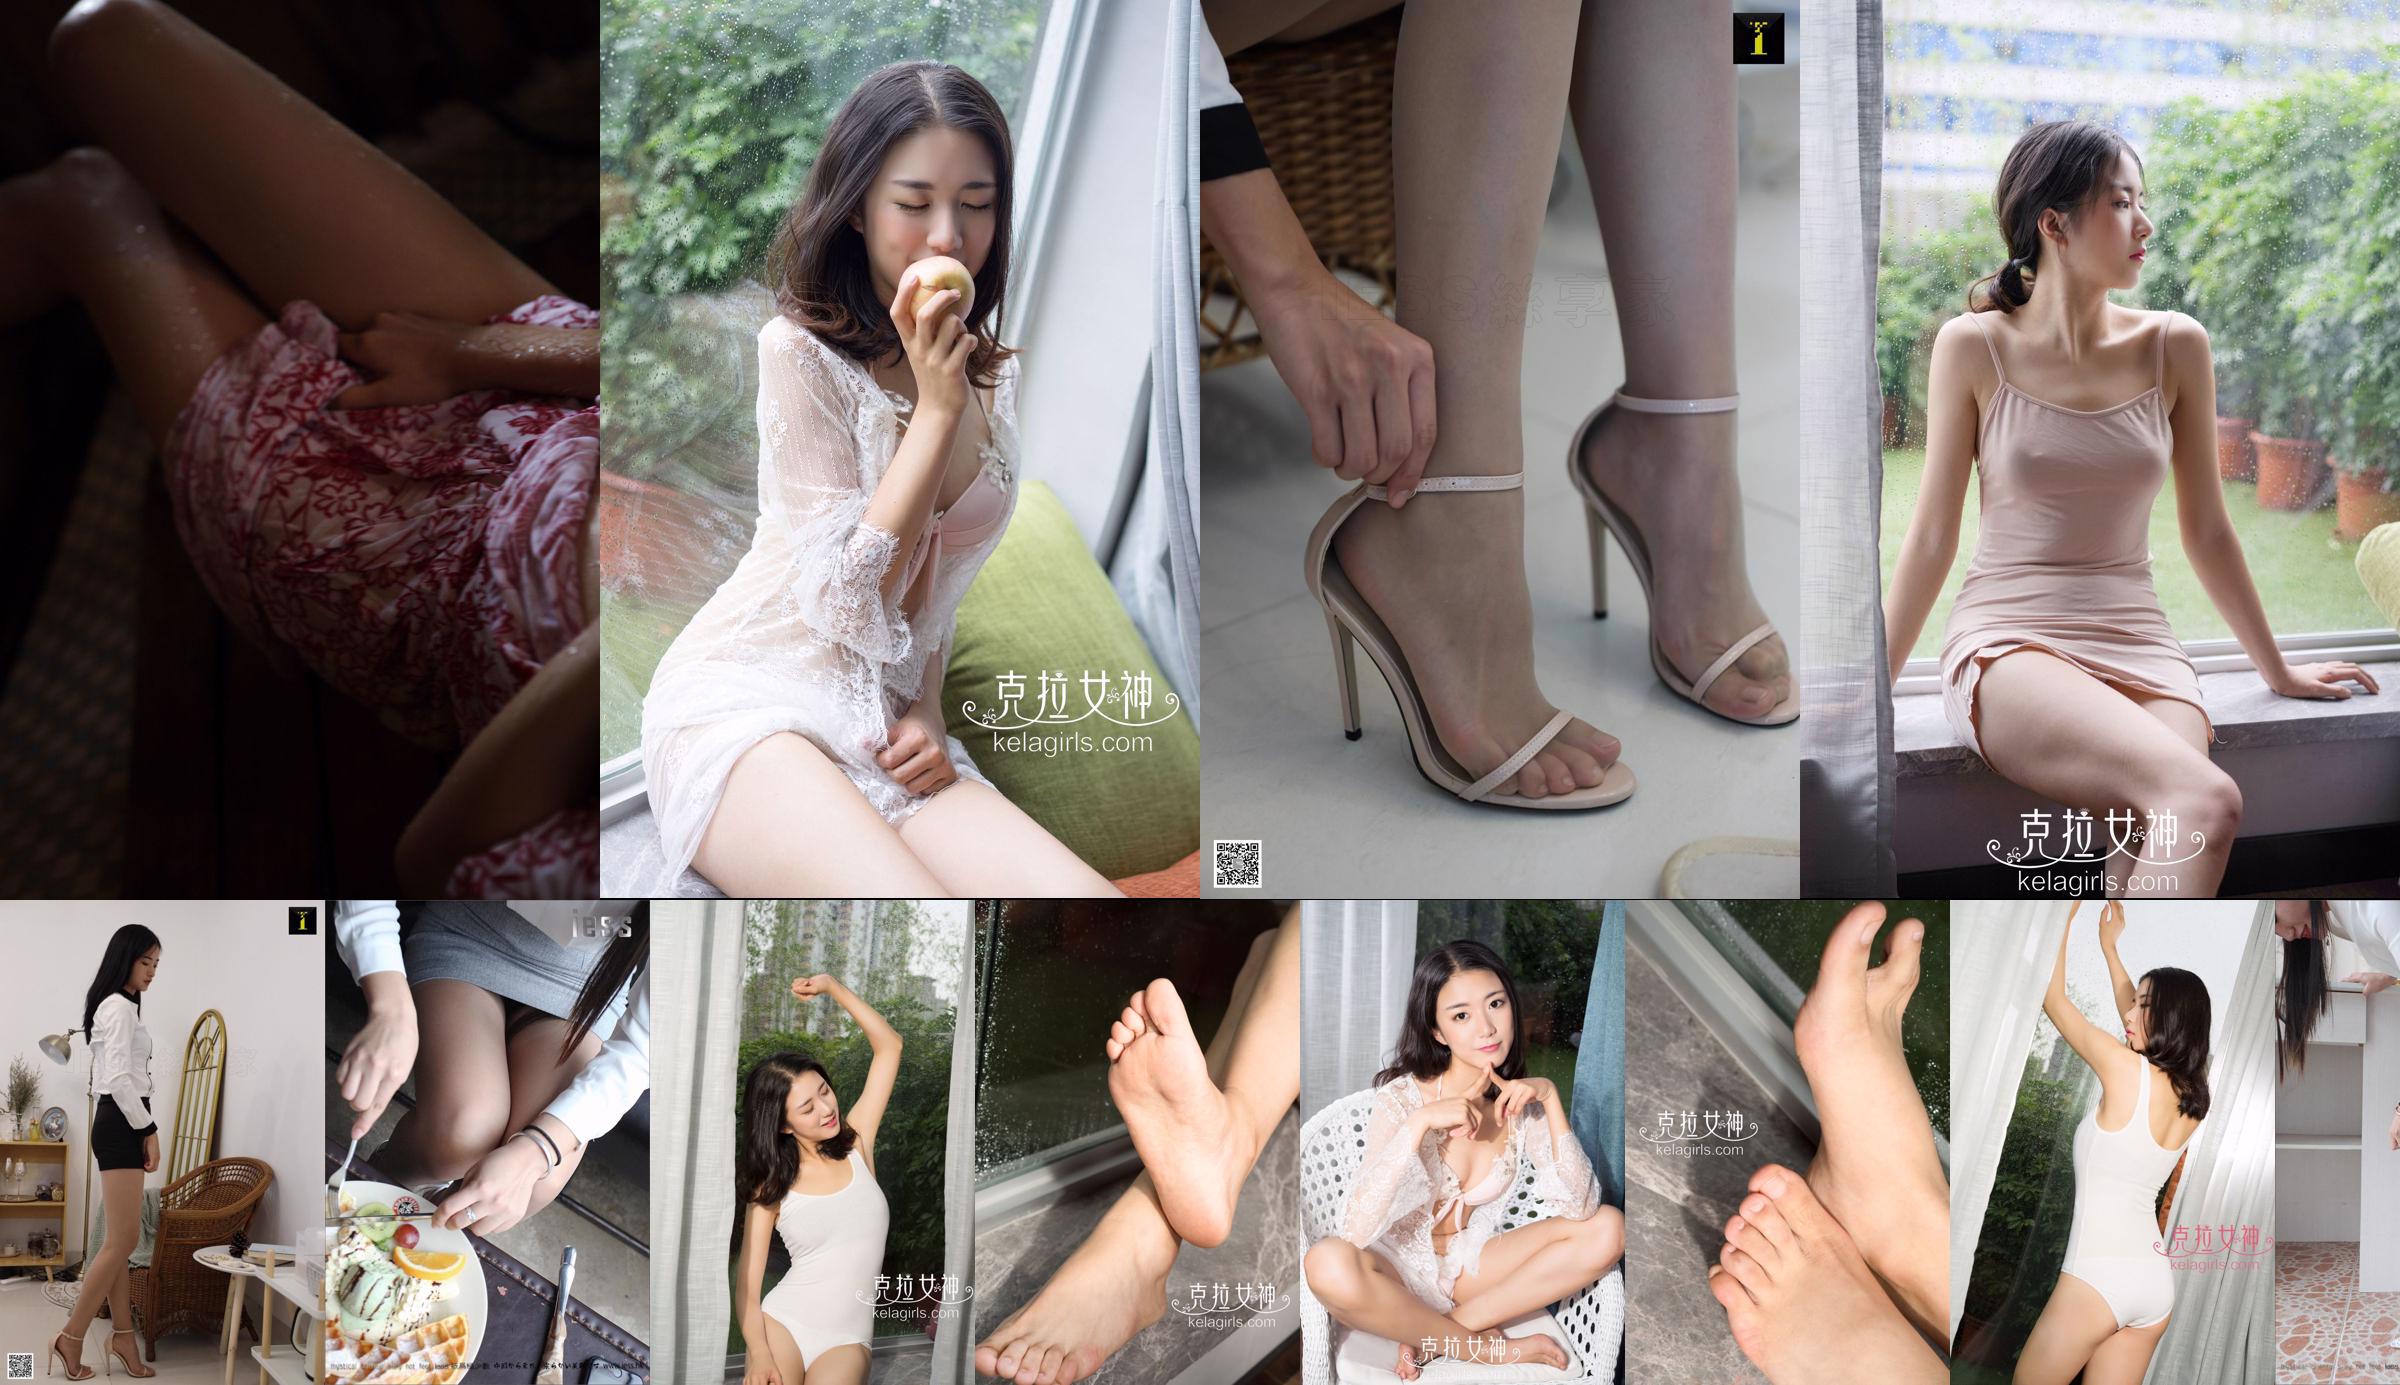 [Gentilhomme Photographie] SS012 Ningning No.83b1a3 Page 2